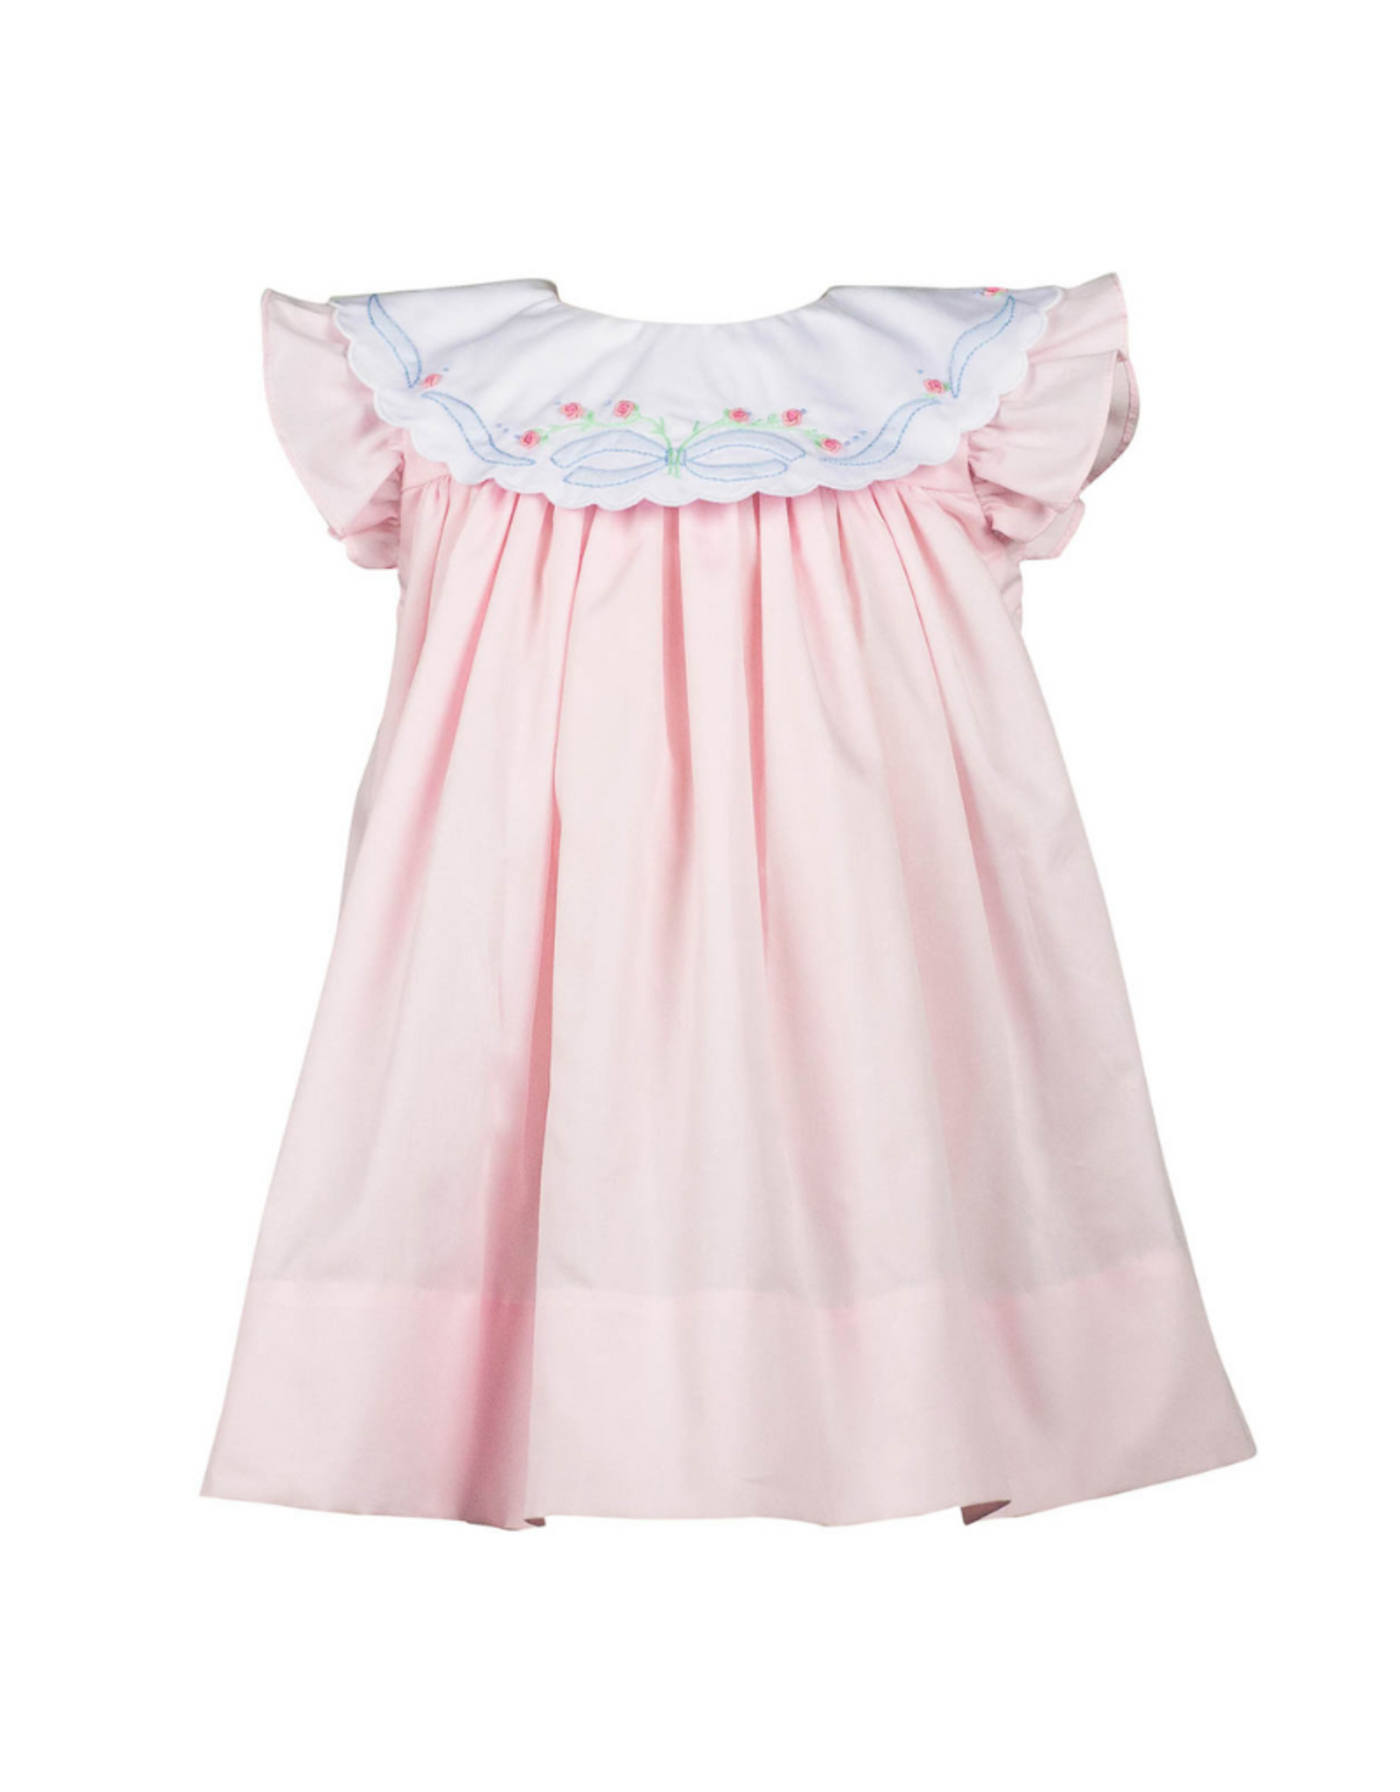 Paloma Dress - Pink Shadow Embroidered - Breckenridge Baby